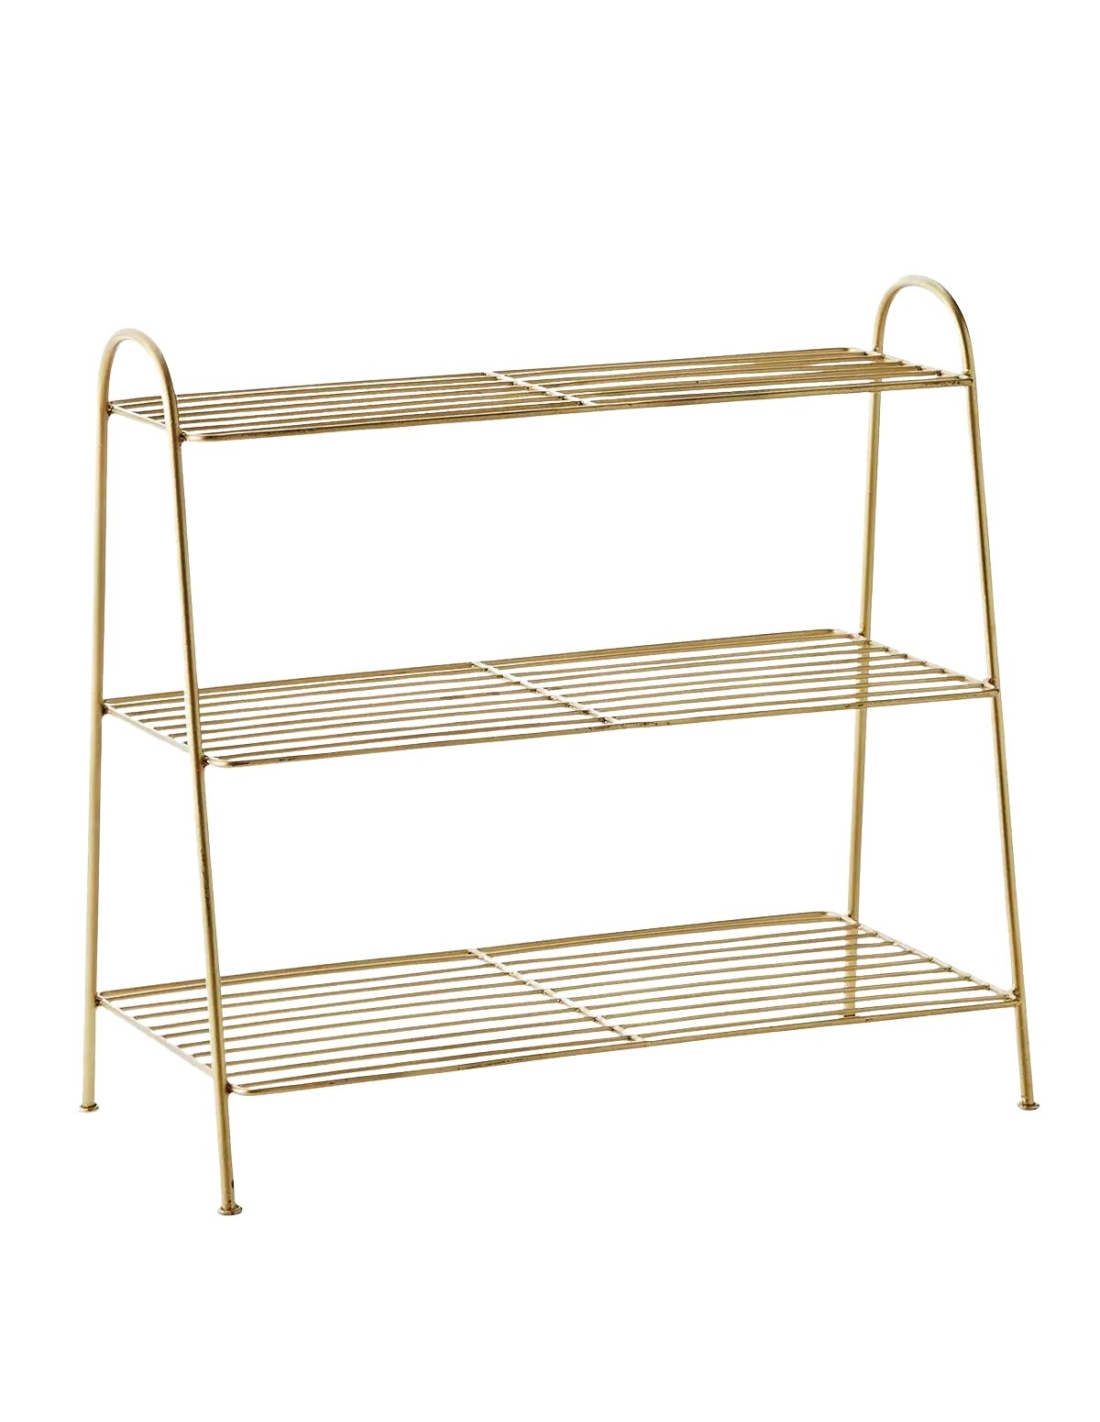 Skill Metal Furniture - 4-Tier Shoe Rack Storage Organizer  https://www.taiwantrade.com/company/skill-metal-industrial-co-ltd-9046.html  Description This is 4 Tier Shoe rack that used to storage shoes. The open  shelf with a sloping iron plate design is